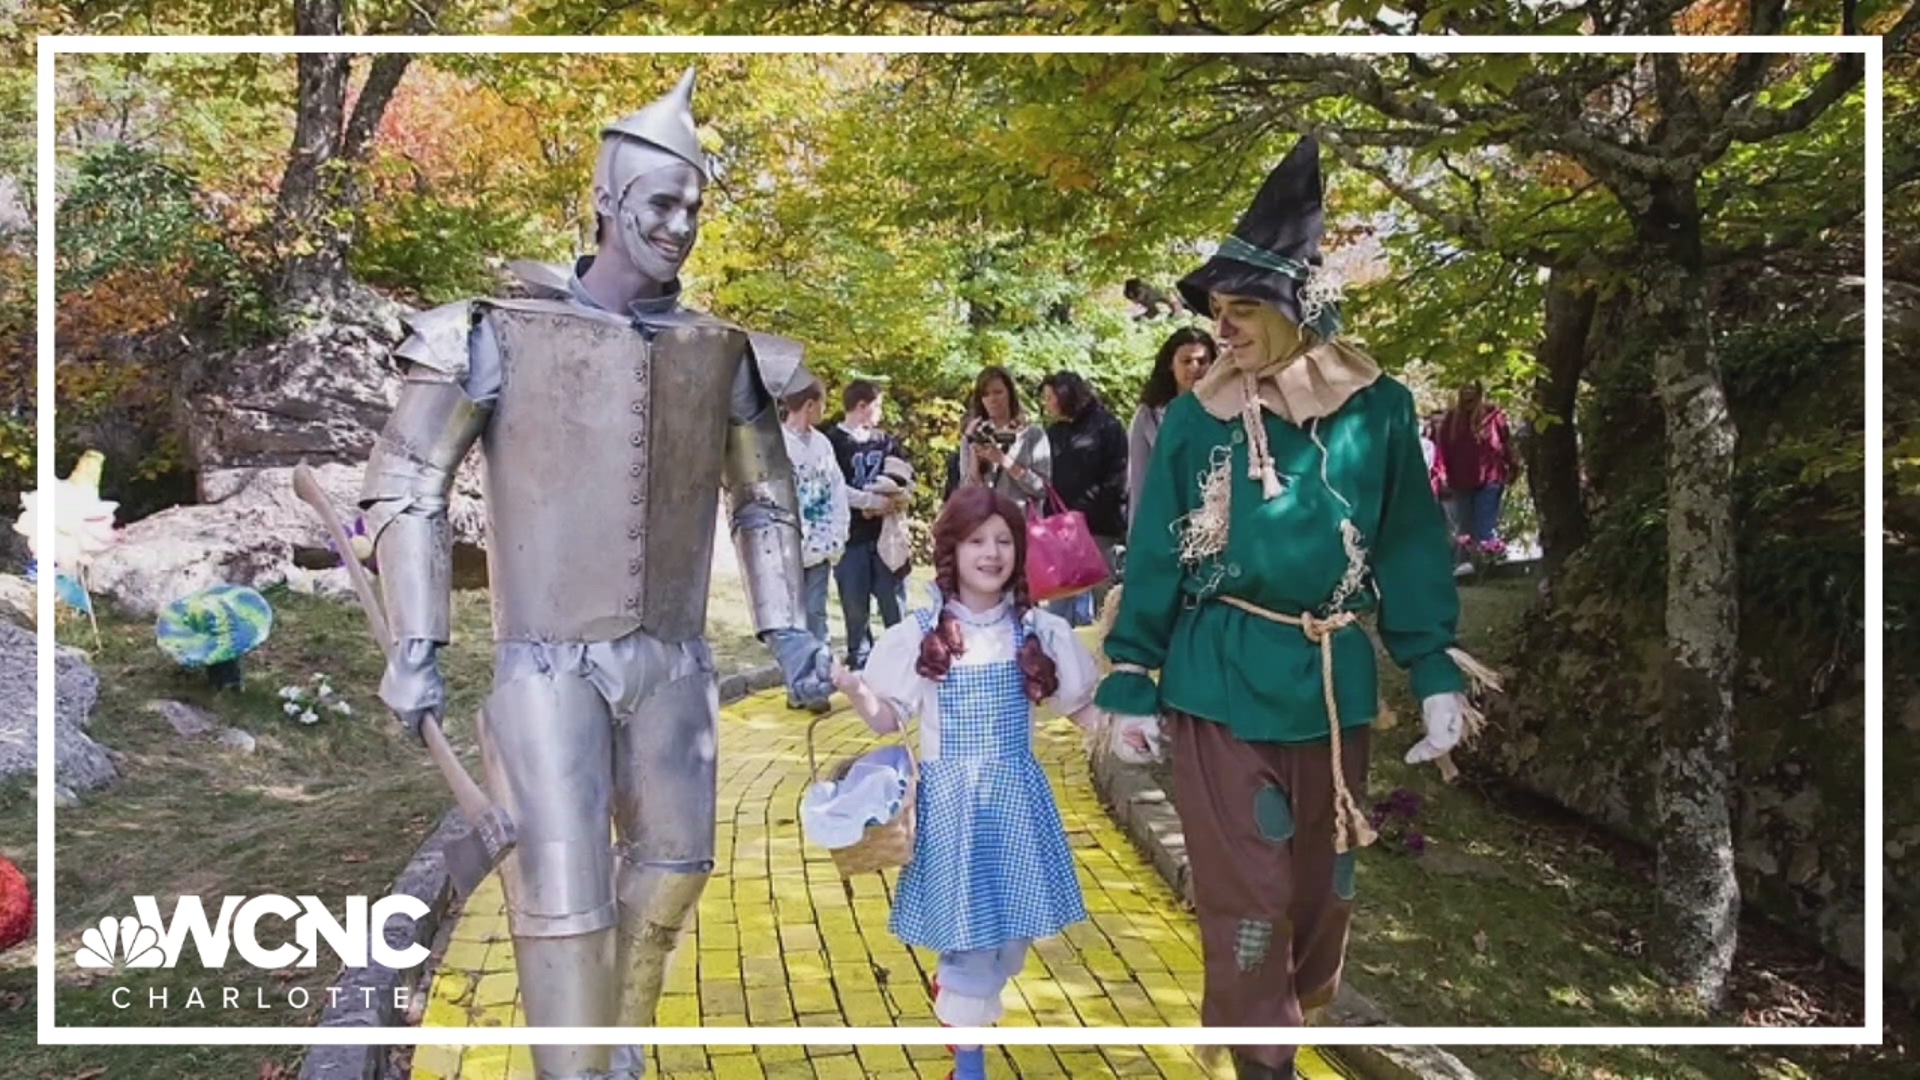 We are one step closer to seeing fairytales come to life in Beech mountain. Tickets are now on sale for North Carolina's Land of Oz.